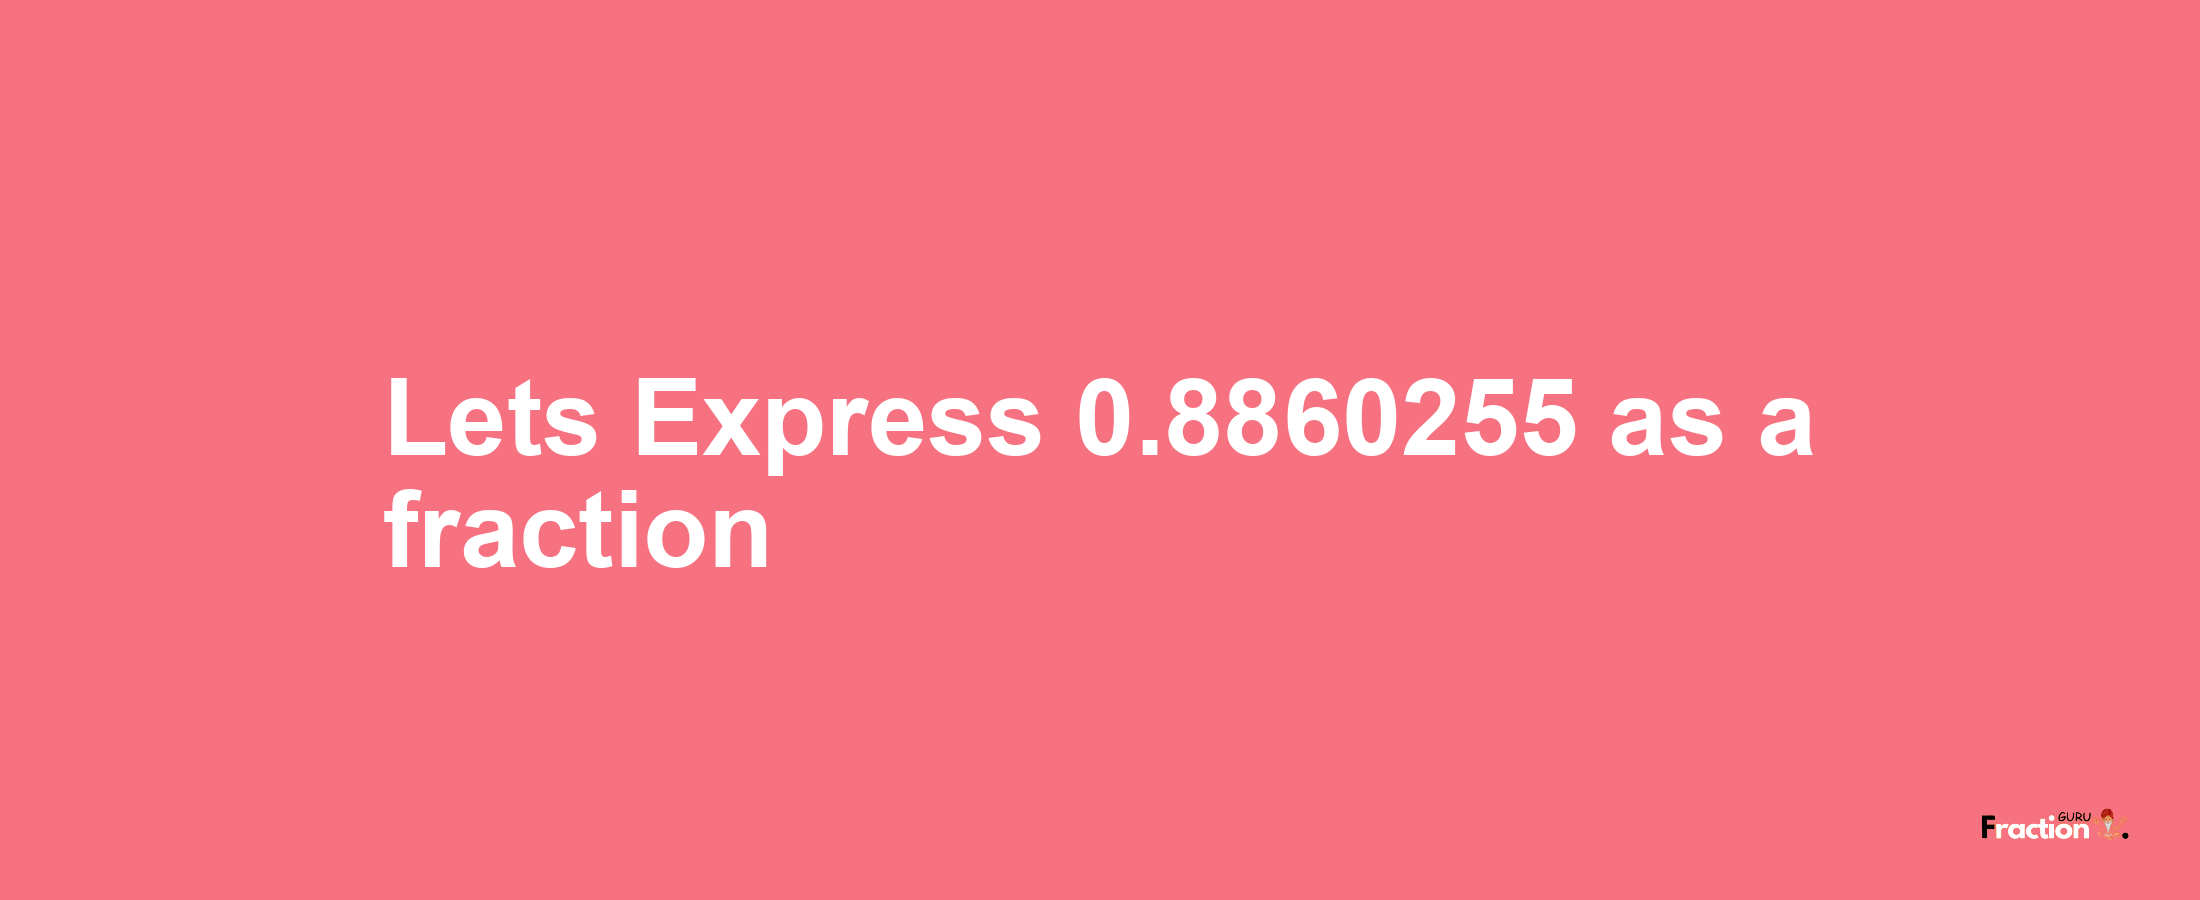 Lets Express 0.8860255 as afraction